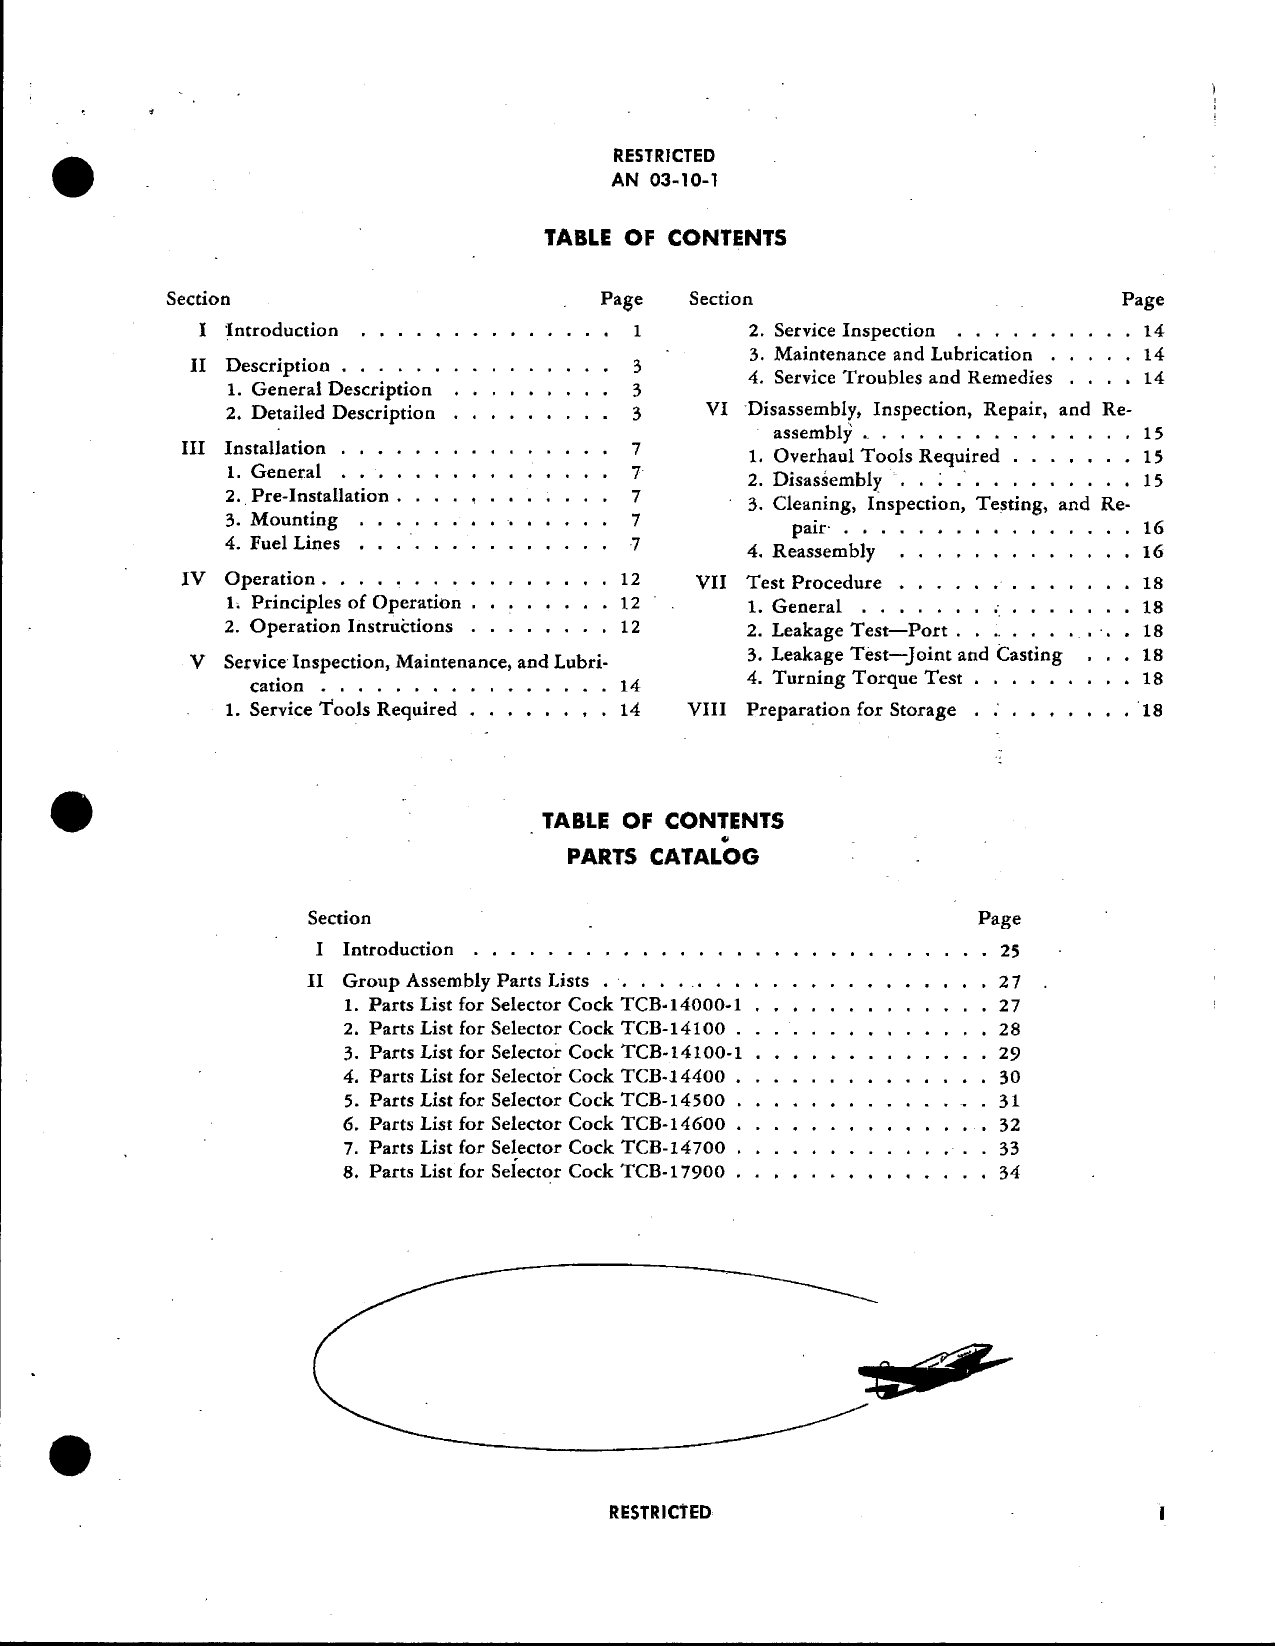 Sample page 5 from AirCorps Library document: Handbook with Parts Catalog for Fuel Line Selector Cock